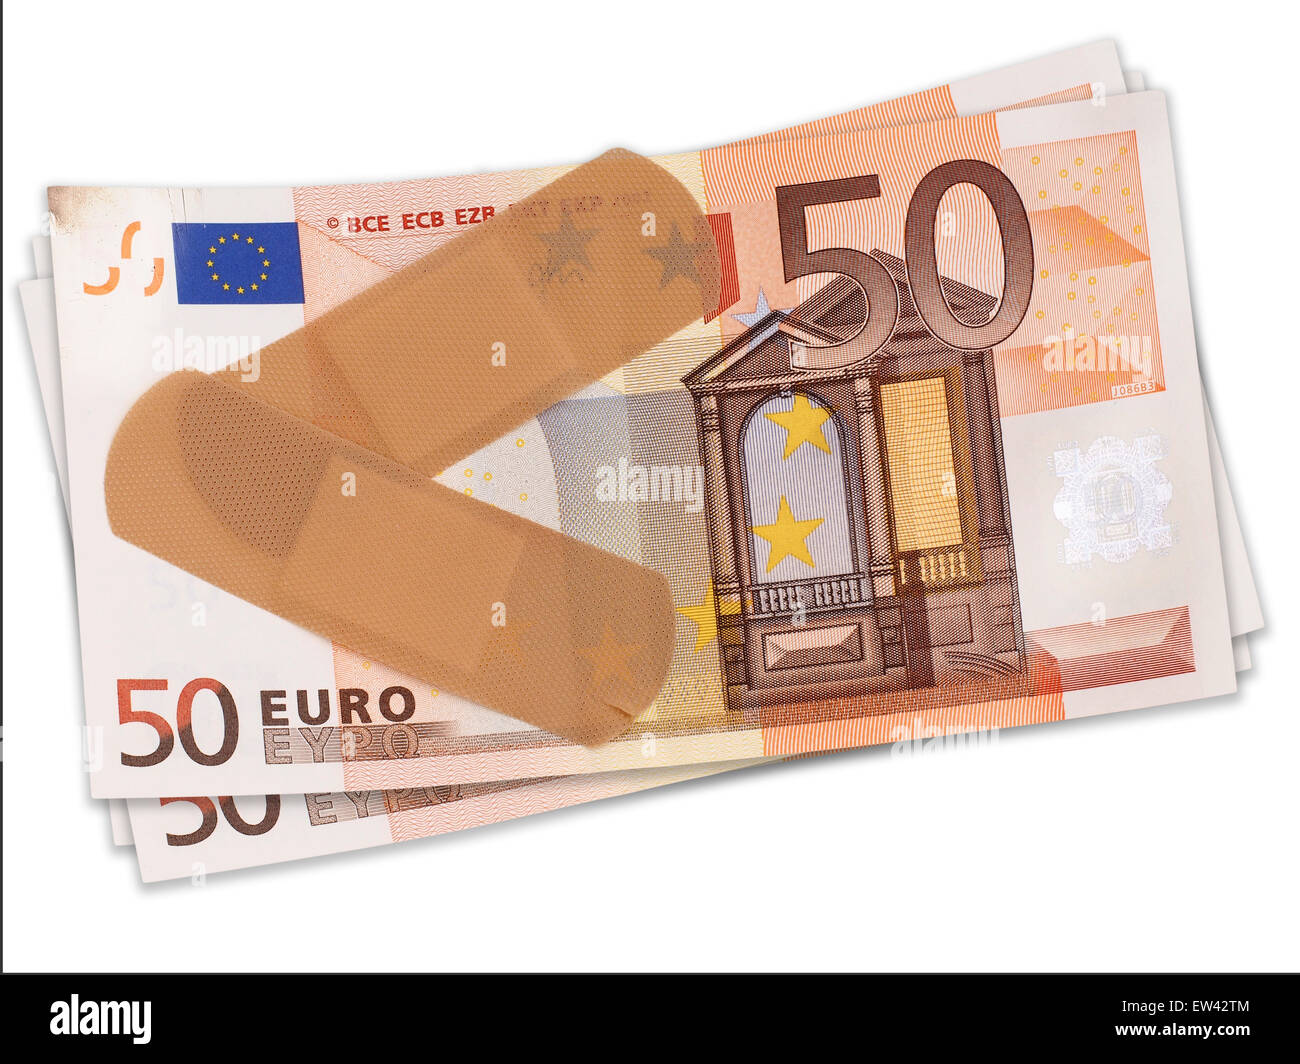 Difficult times for the Eurozone. Patched up for now. Stock Photo